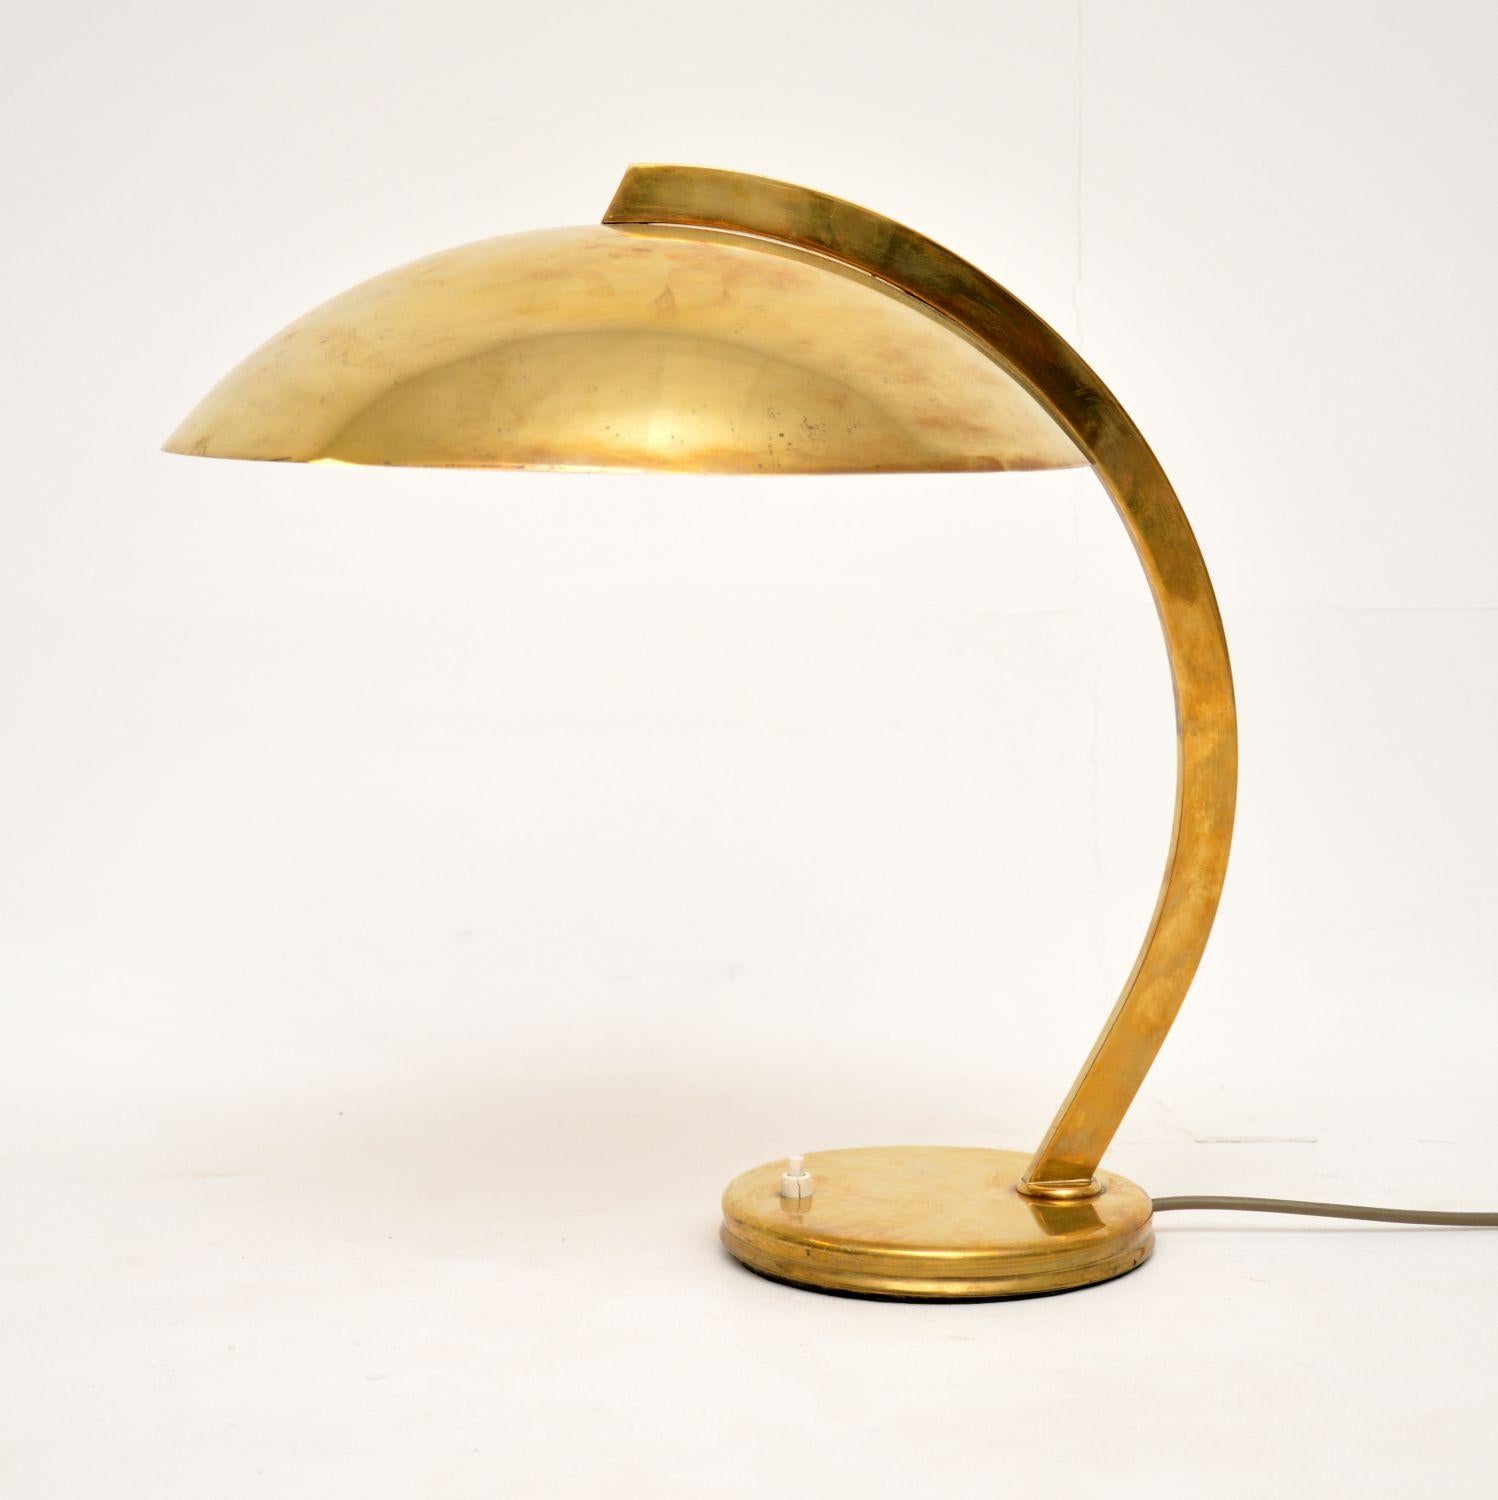 A very stylish and extremely well made vintage brass desk lamp. It is in the Bauhaus style, this was made in Germany by Egon Hillebrand, it dates from the 1950’s.

The quality is amazing, the brass frame has a lovely patina and this has a gorgeous